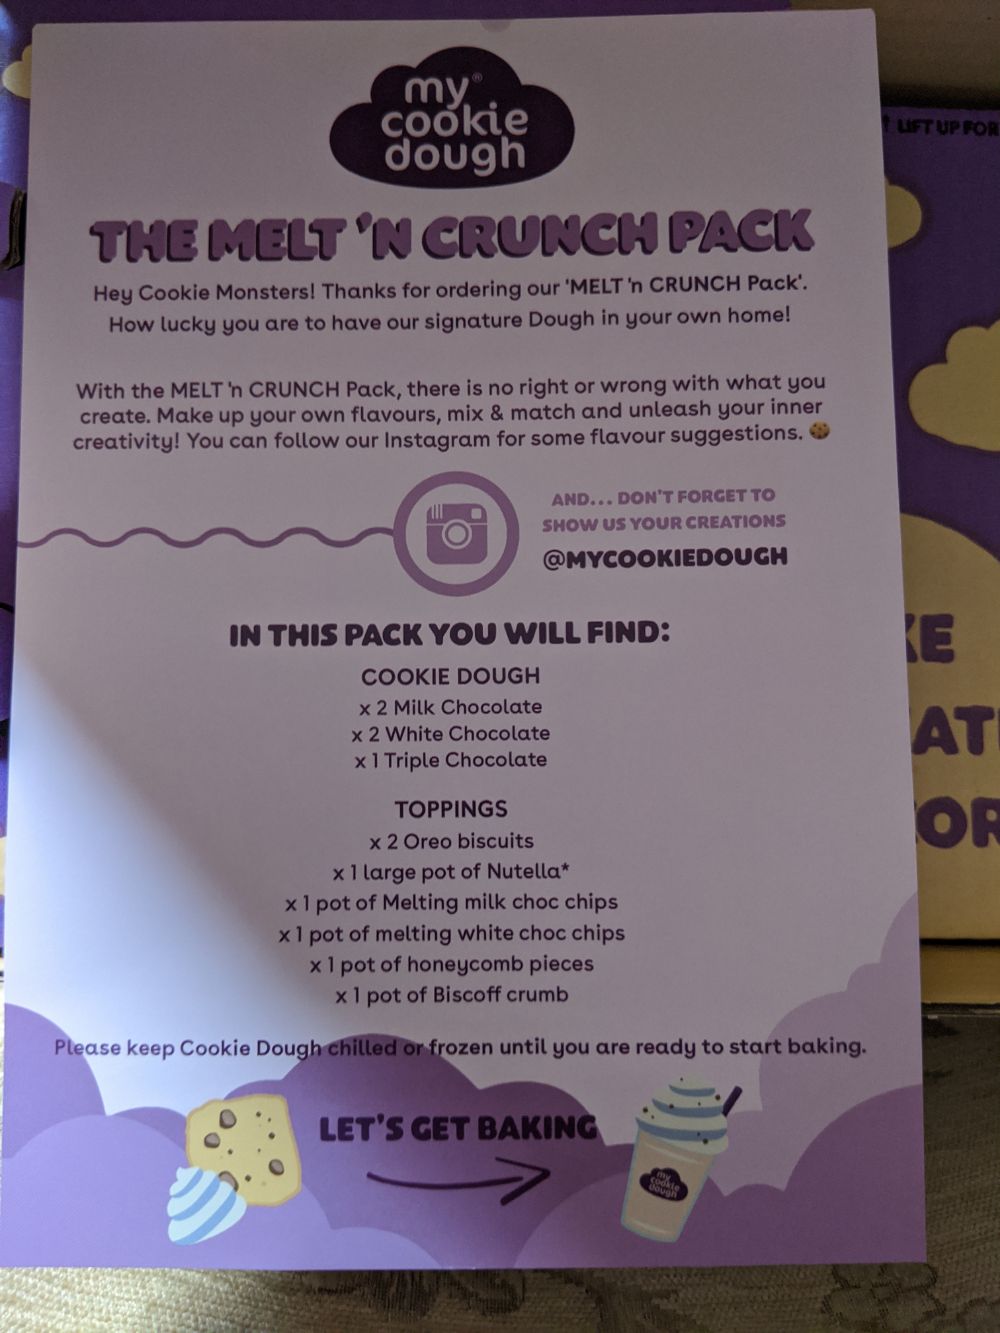 The packaging for the melt'n crunch pack, listing its contents